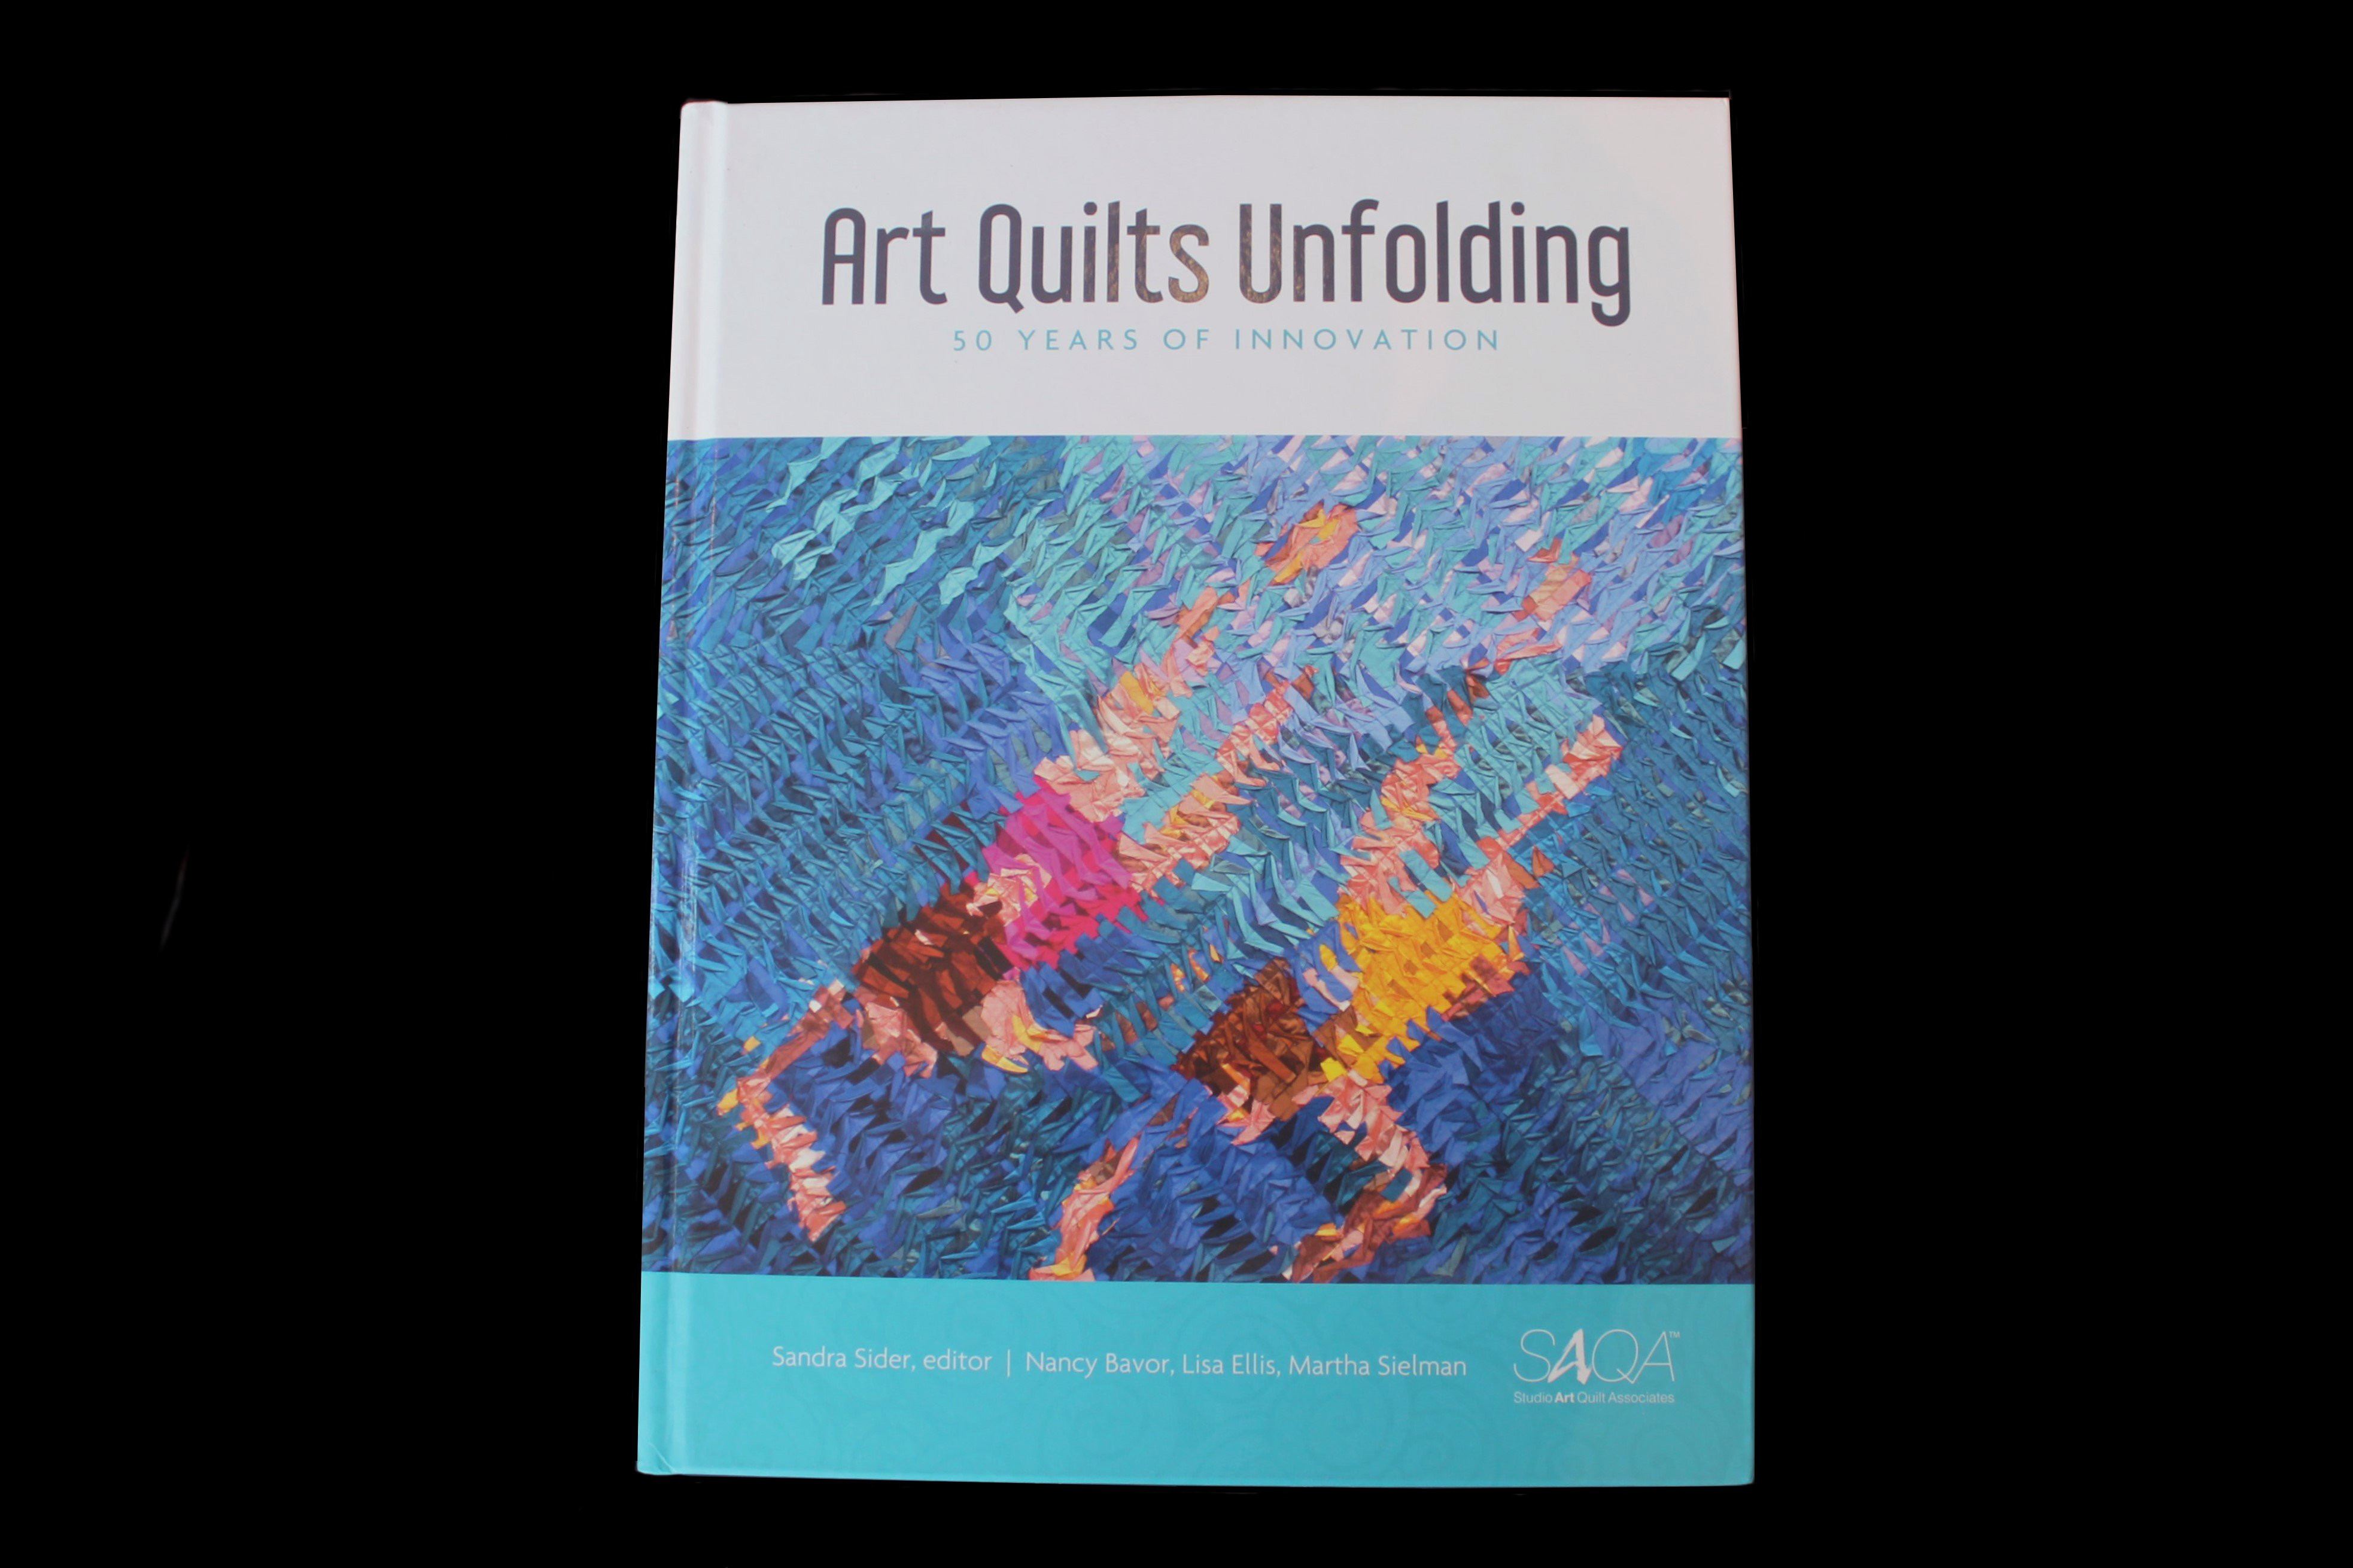 Art Quilts Unfolding: 50 Years of Innovation